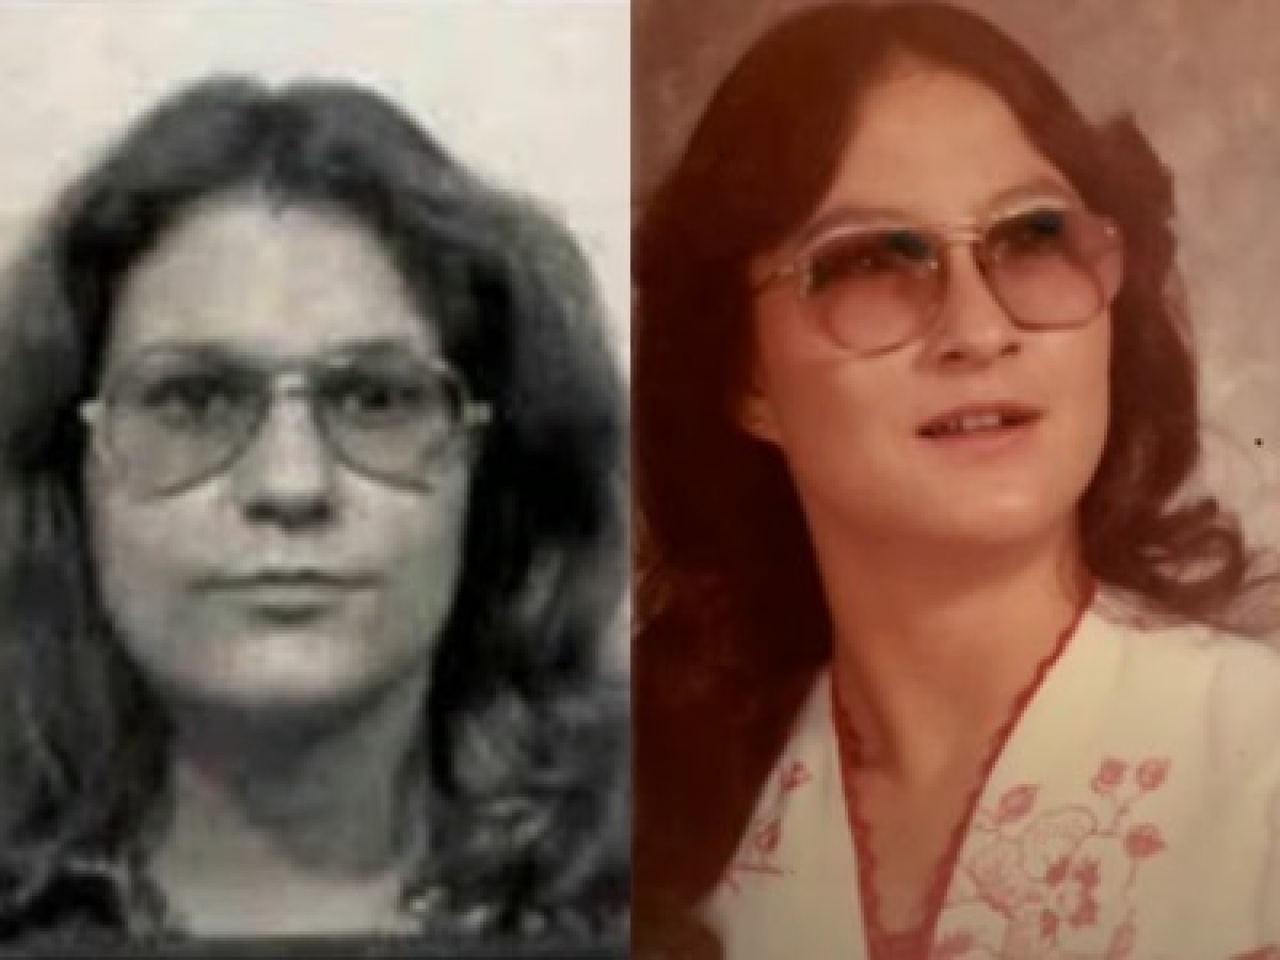 [IMAGE] DNA Links Suspect to 1975, 1991 Murders